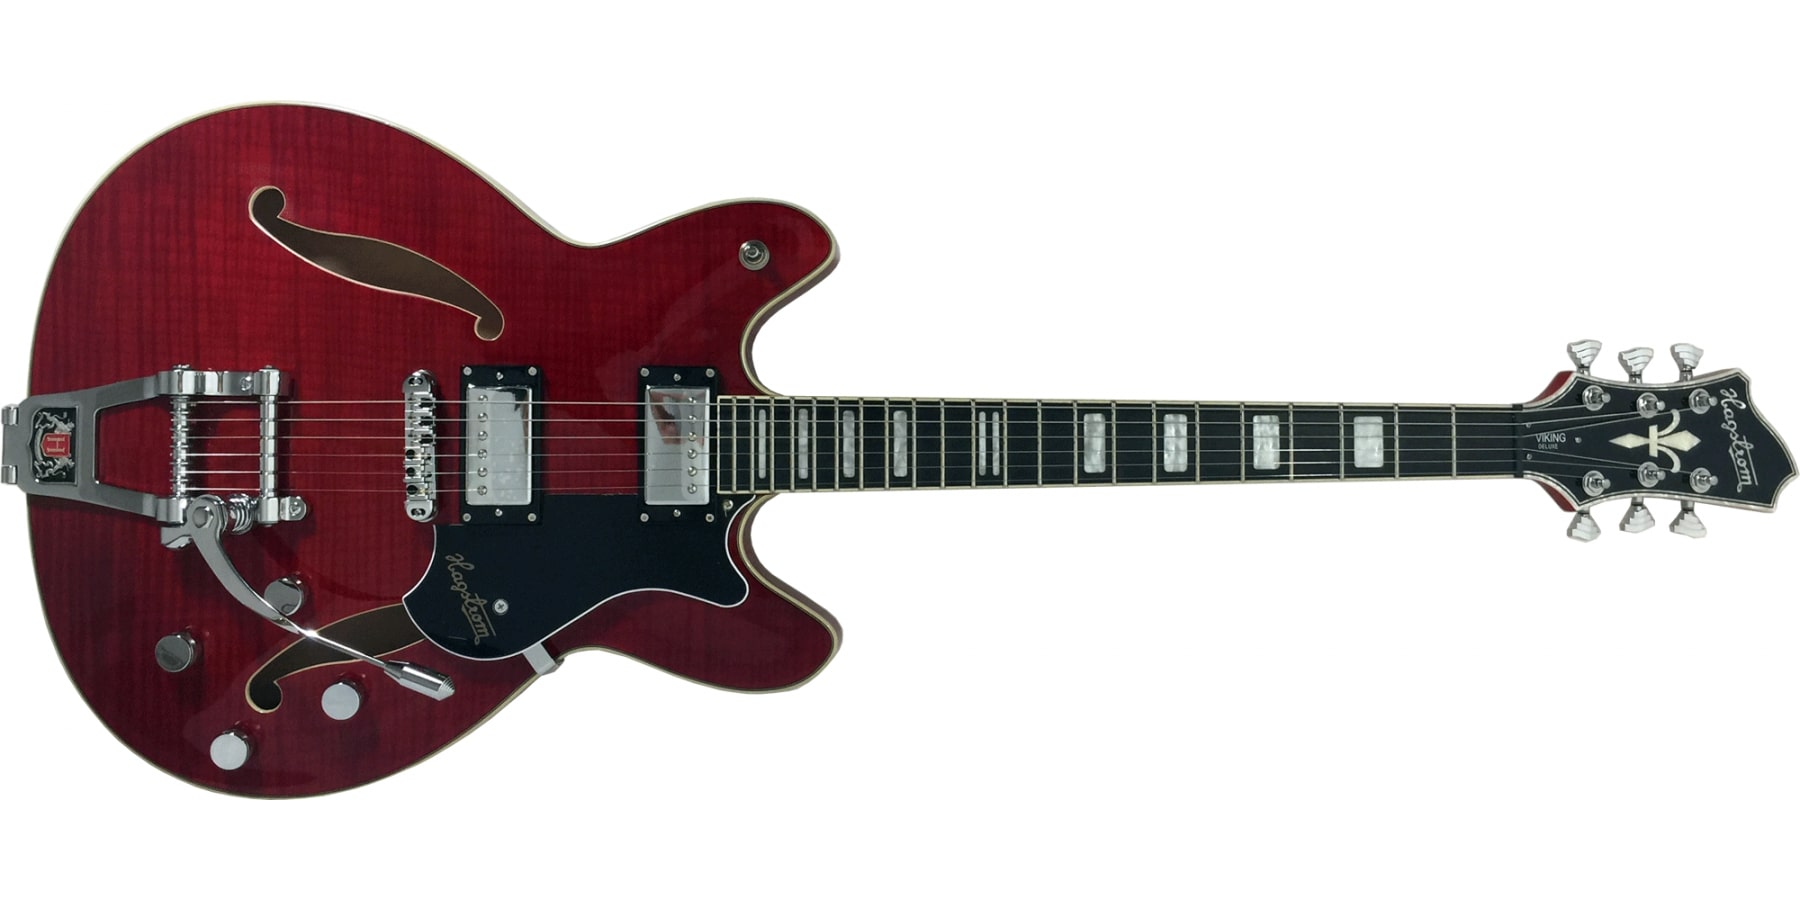 Hagstrom Tremar Viking Deluxe 6-String Electric Guitar, Wild Cherry Transparent TREVIDLX-WCT